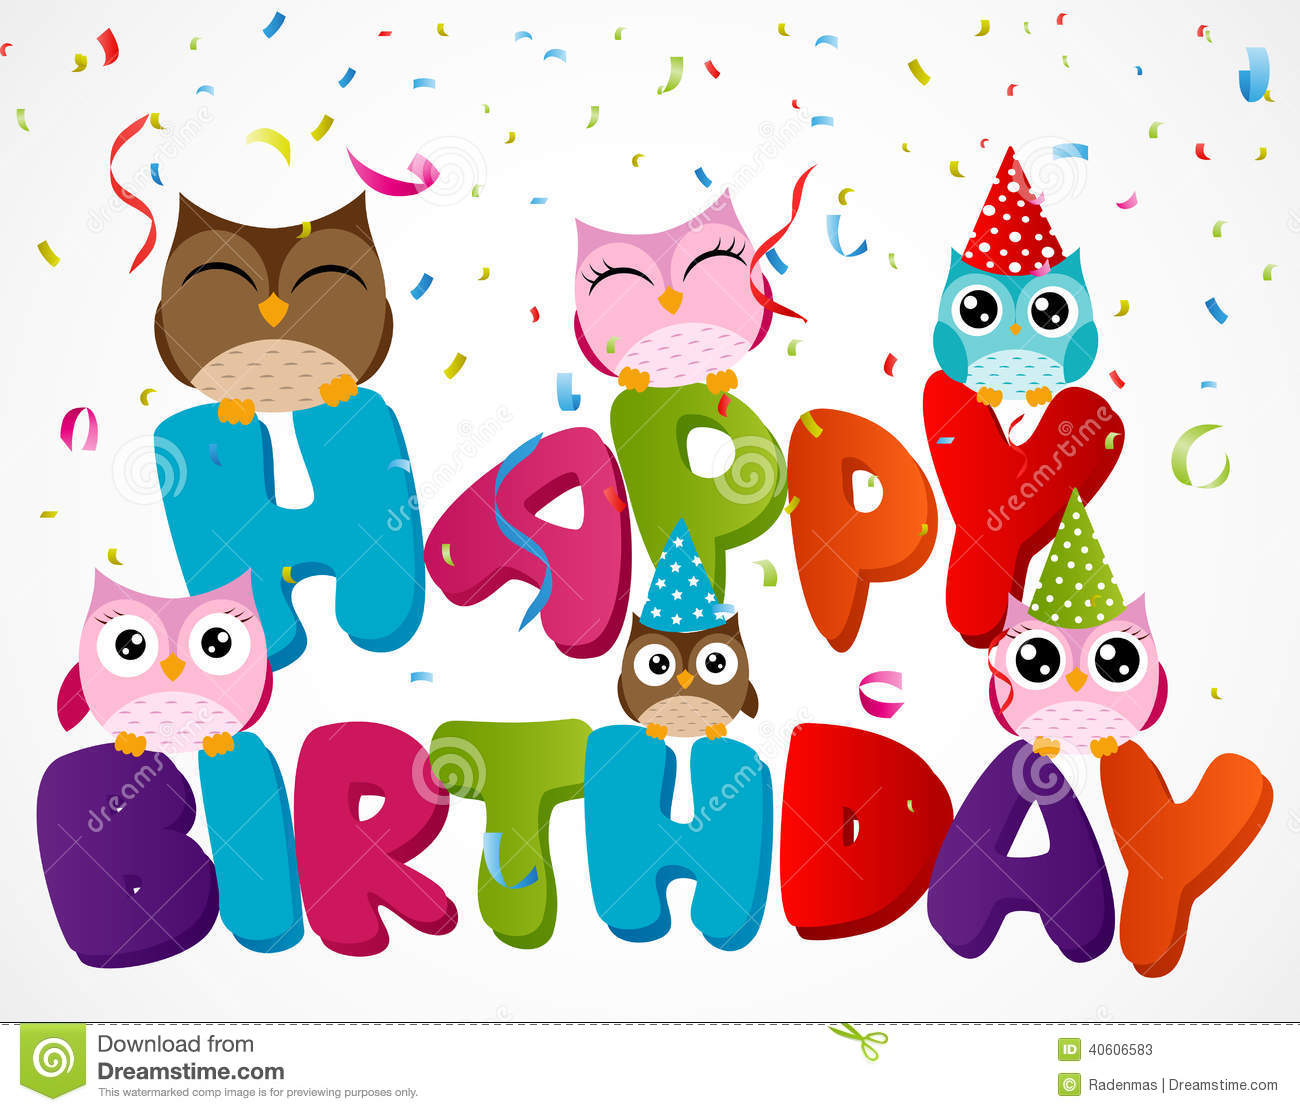 Happy Birthday Card With Owl Stock Vector   Image  40606583